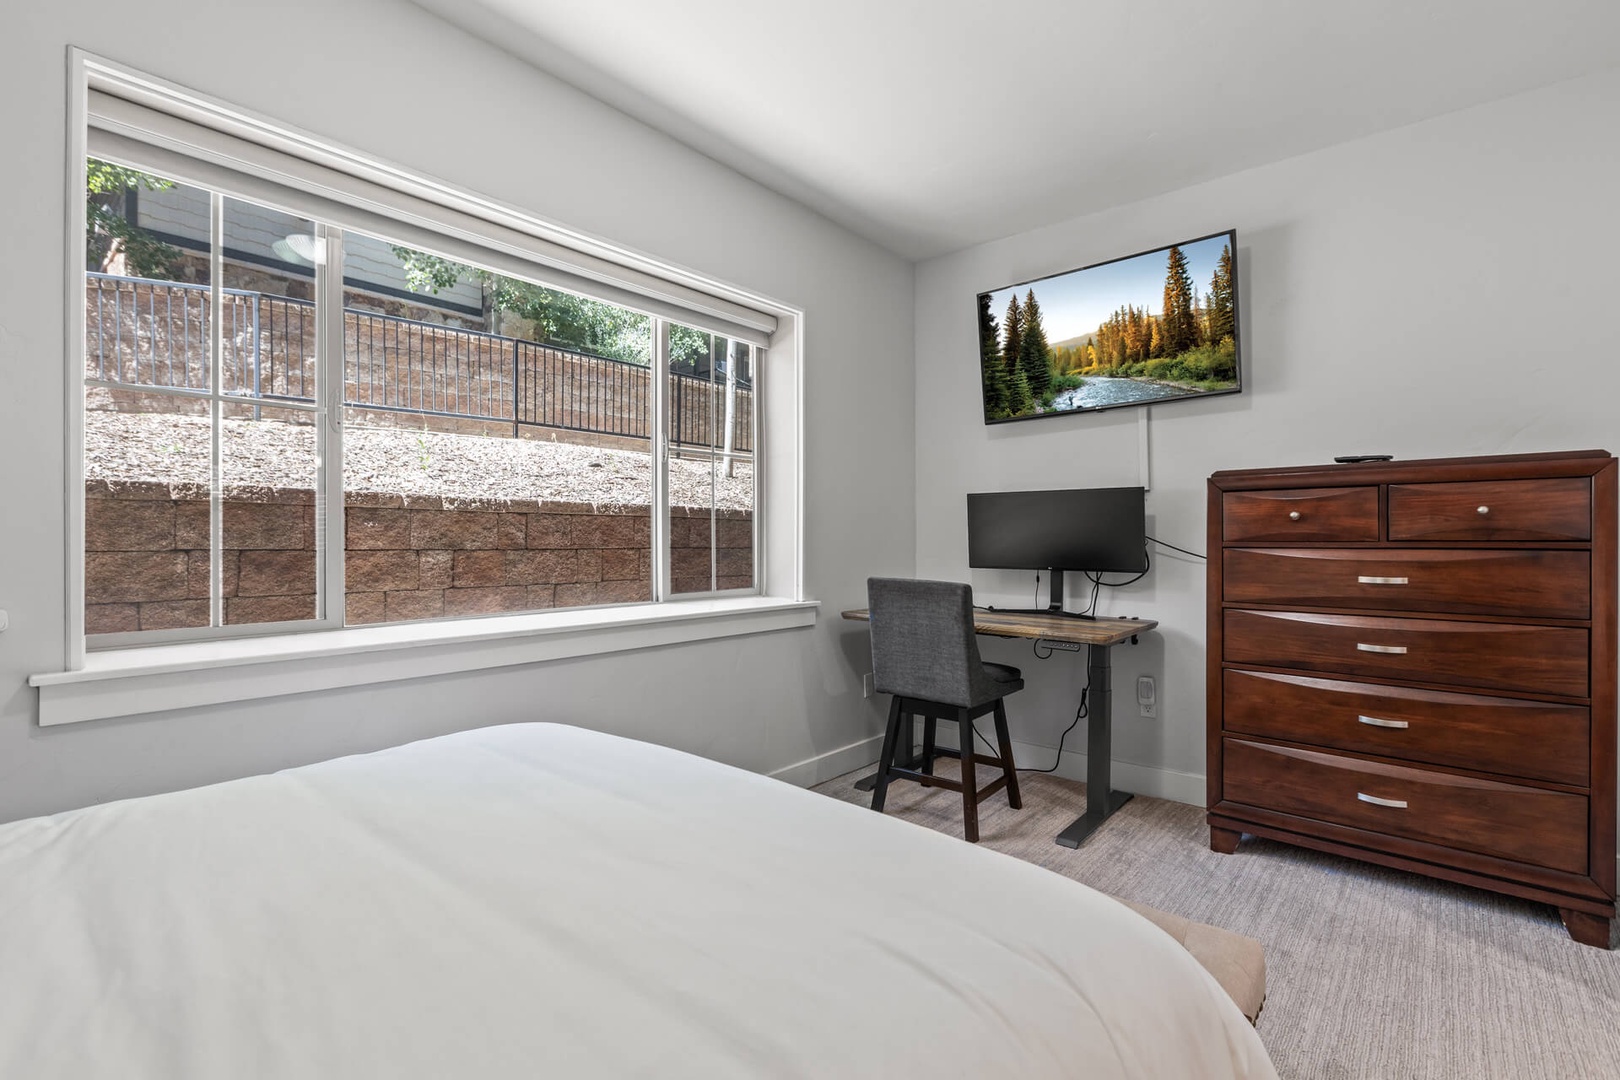 Bear Hollow Lodges 4203: In the PRIMARY BEDROOM SUITE, you’ll find a sumptuous queen-size bed and a small desk space.